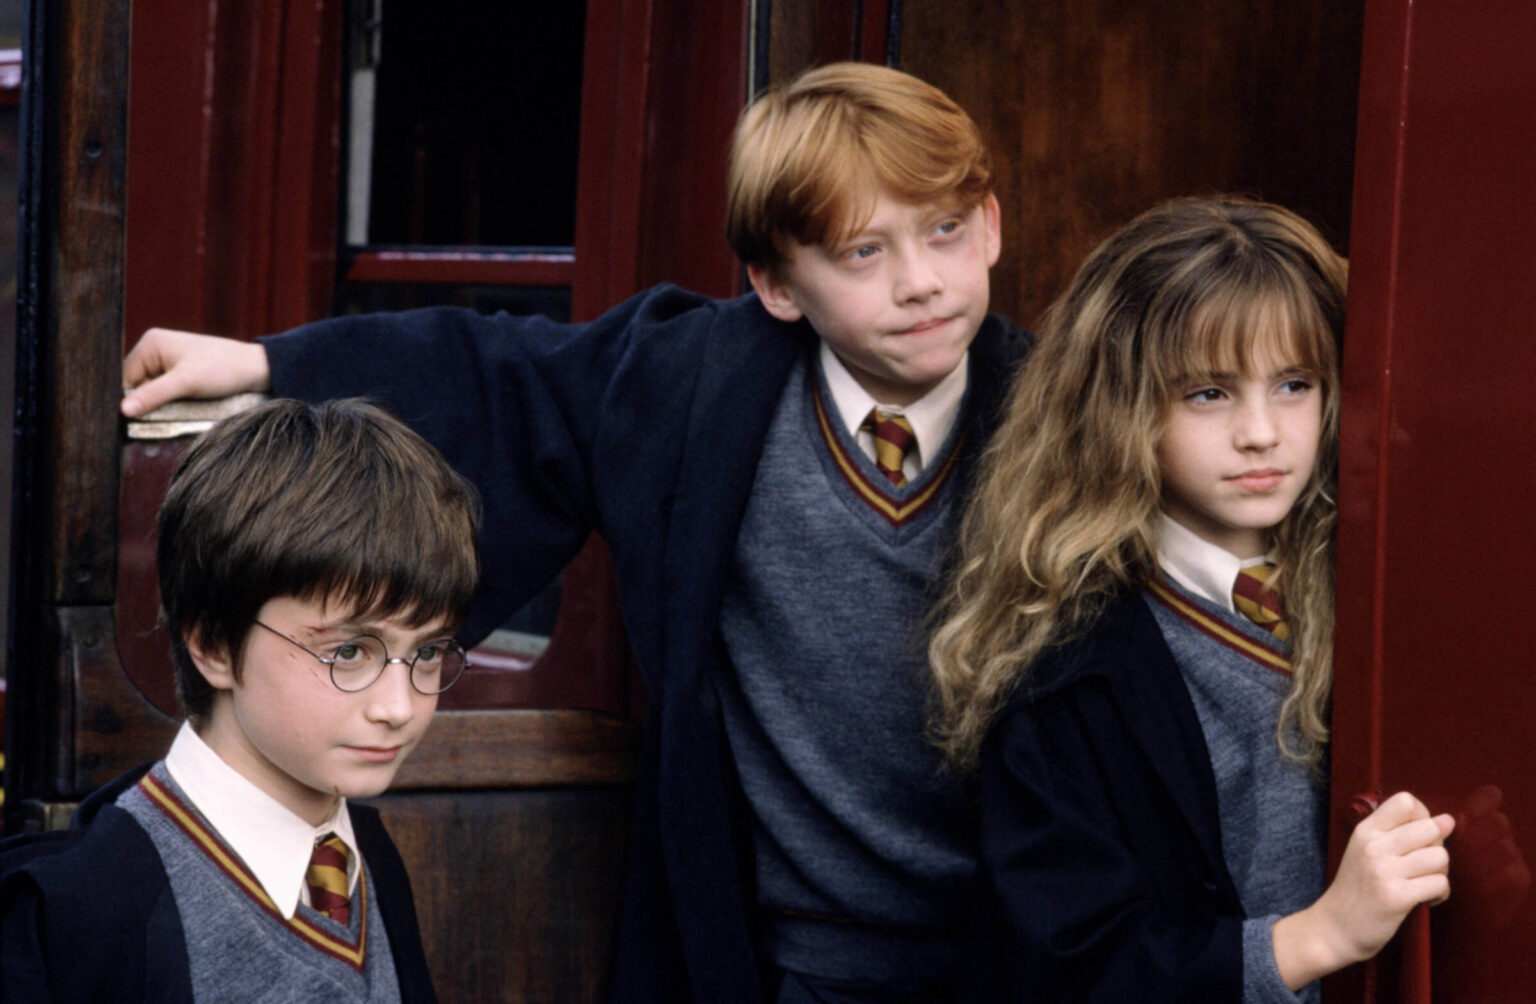 'Harry Potter' may not be getting a reboot any time soon, but we can always dream! Check out our vision for a new film series in the Wizarding World.